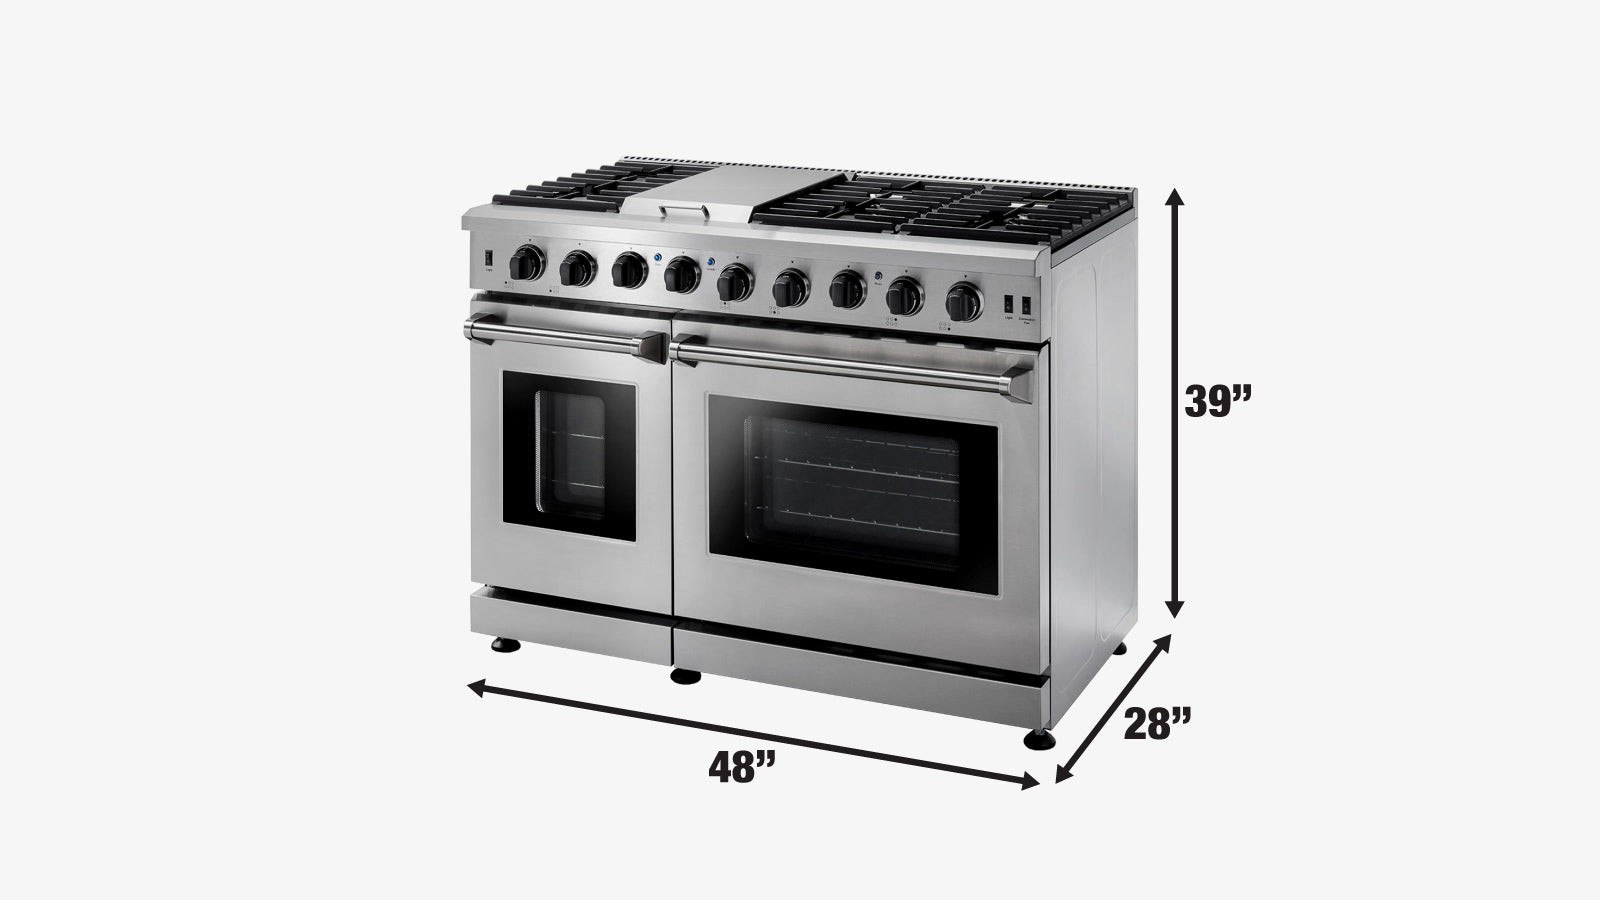 TMG Living Kitchen 48” Freestanding Gas Convection Range, Commercial Convection Fan, 3-Layered Glass Window, 9000-18500 BTU, TMG-HRG48-specifications-image